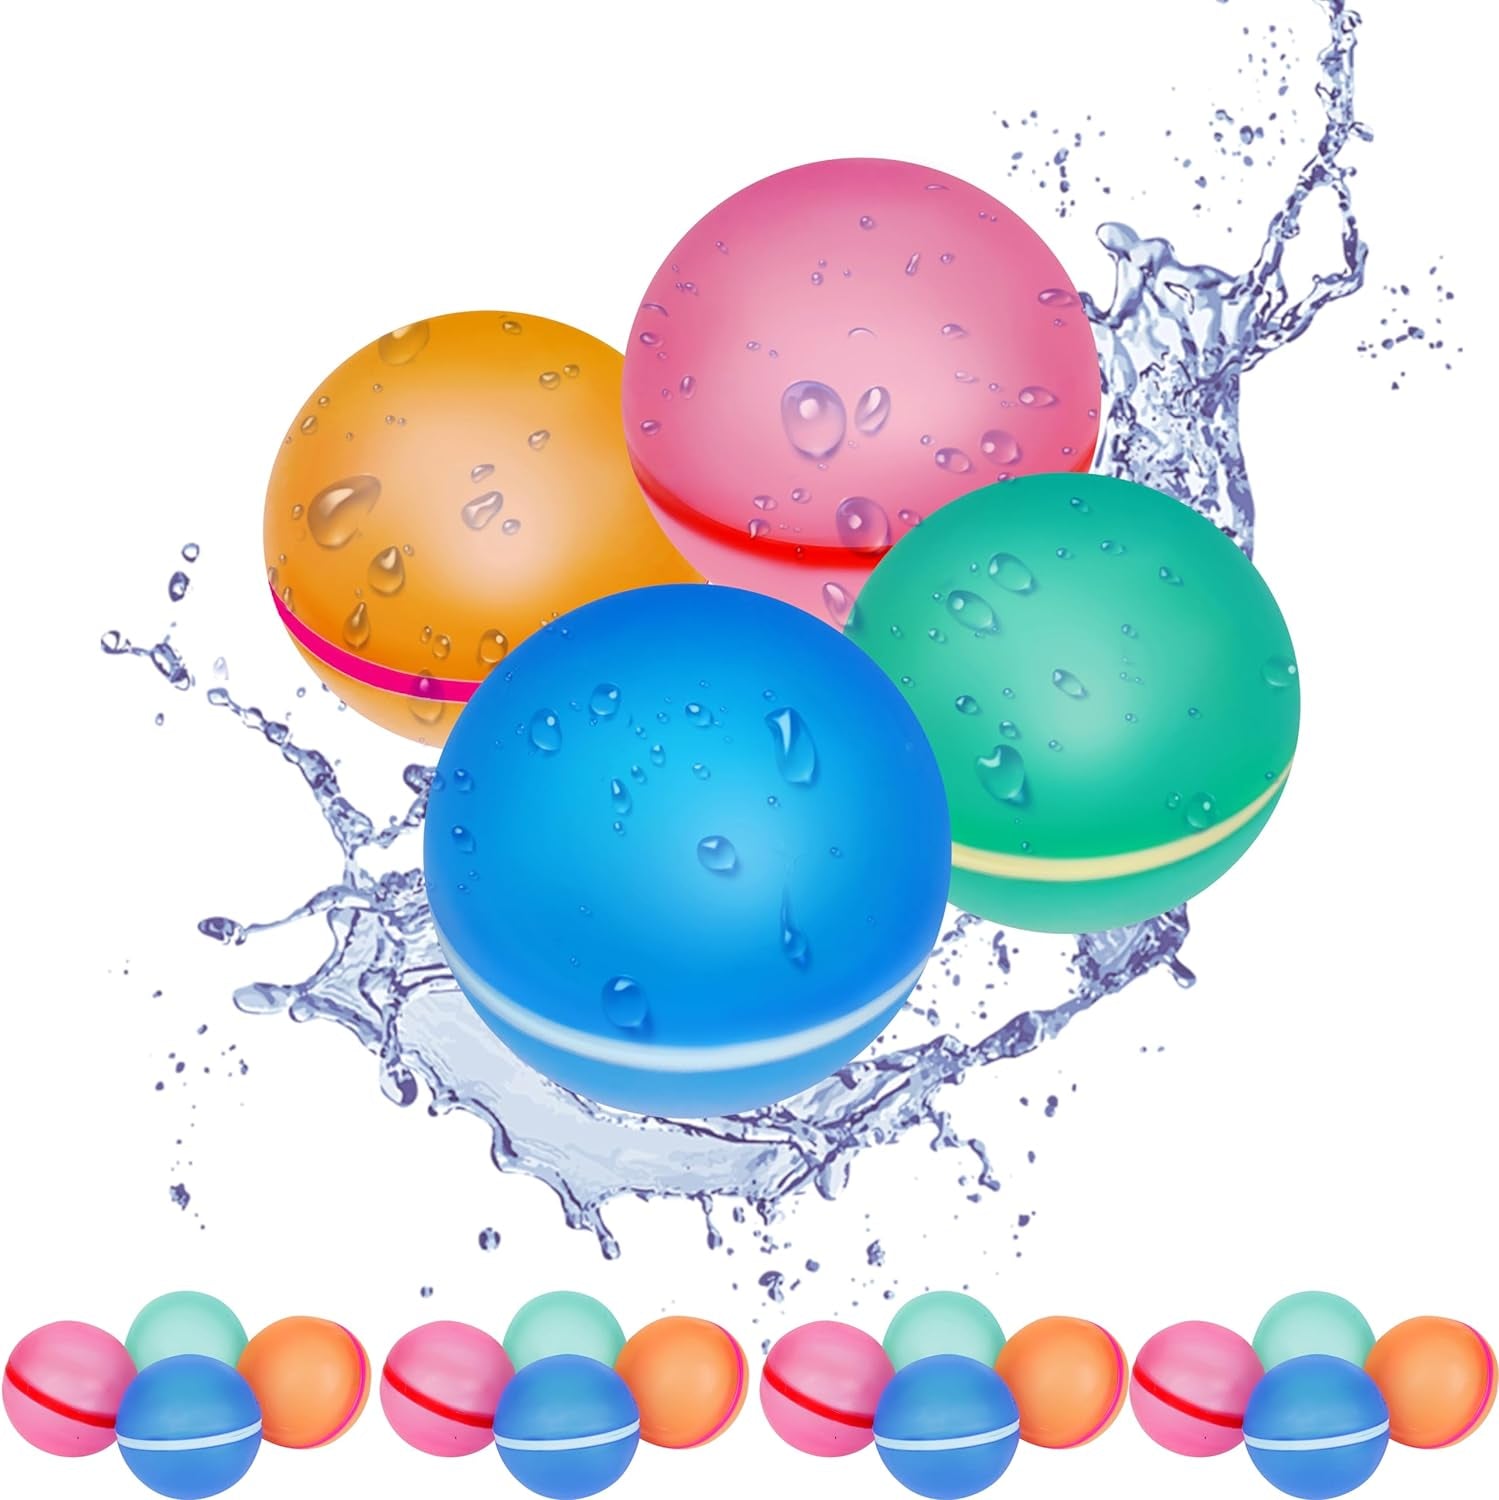 16Pcs Reusable Water Balloons - Quick Fill Water Balls Toys for Kids Age 4-12 - Refillable Magnetic Self-Sealing Water Splash Bomb for Party Outdoor Summer Pool Beach Toys